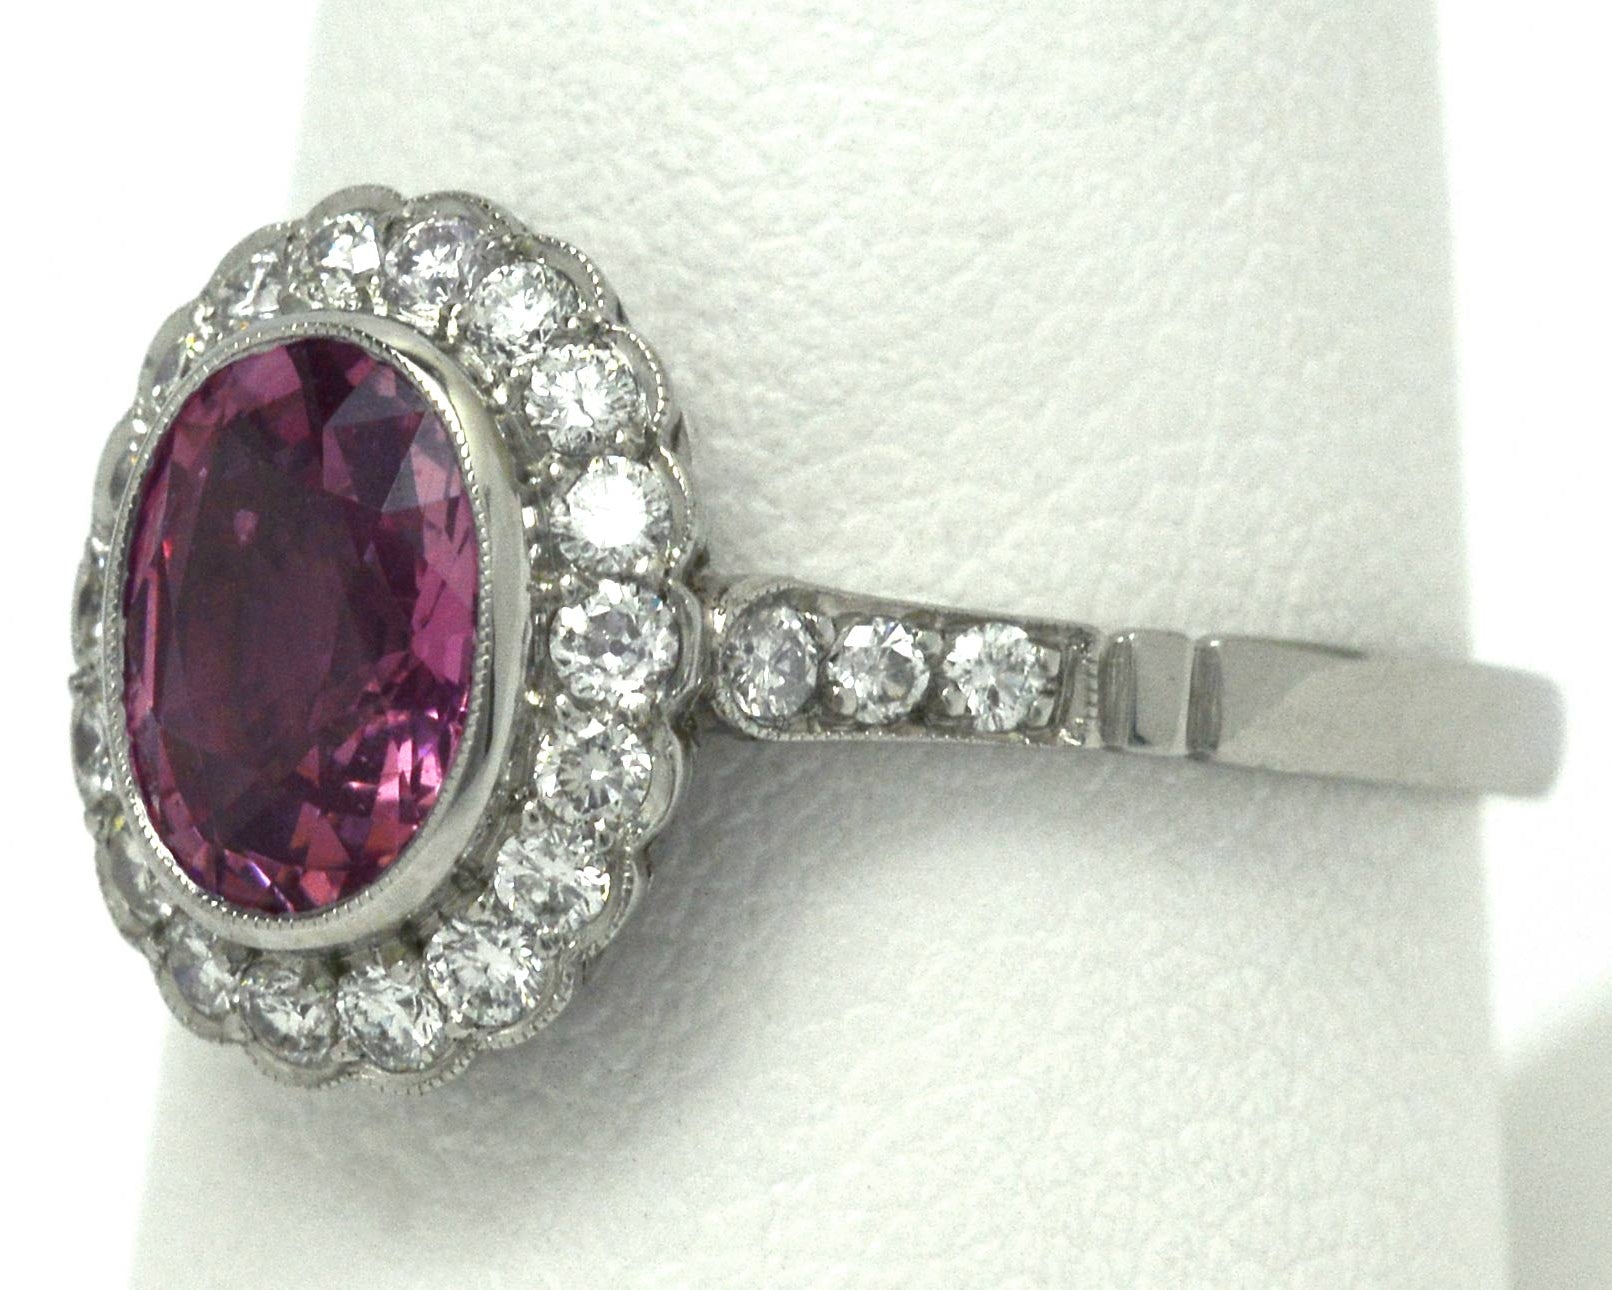 A milgrain diamond halo engagement ring, set with a natural, oval pink sapphire.